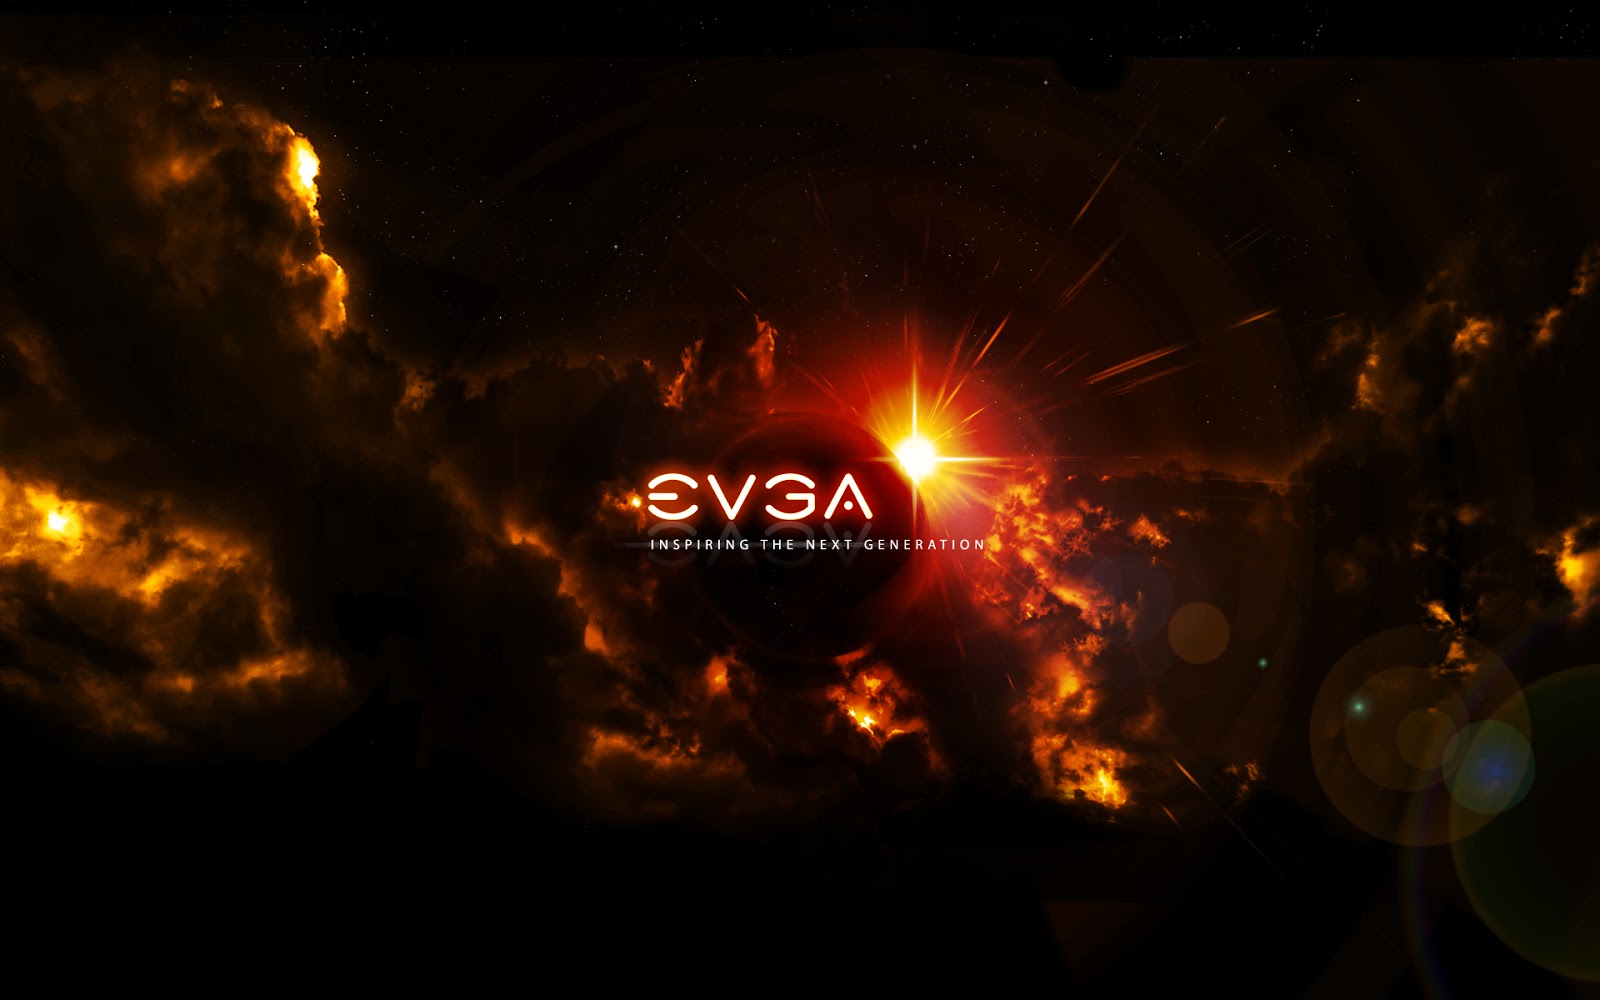 Image Evga Wallpaper Pc Android iPhone And iPad